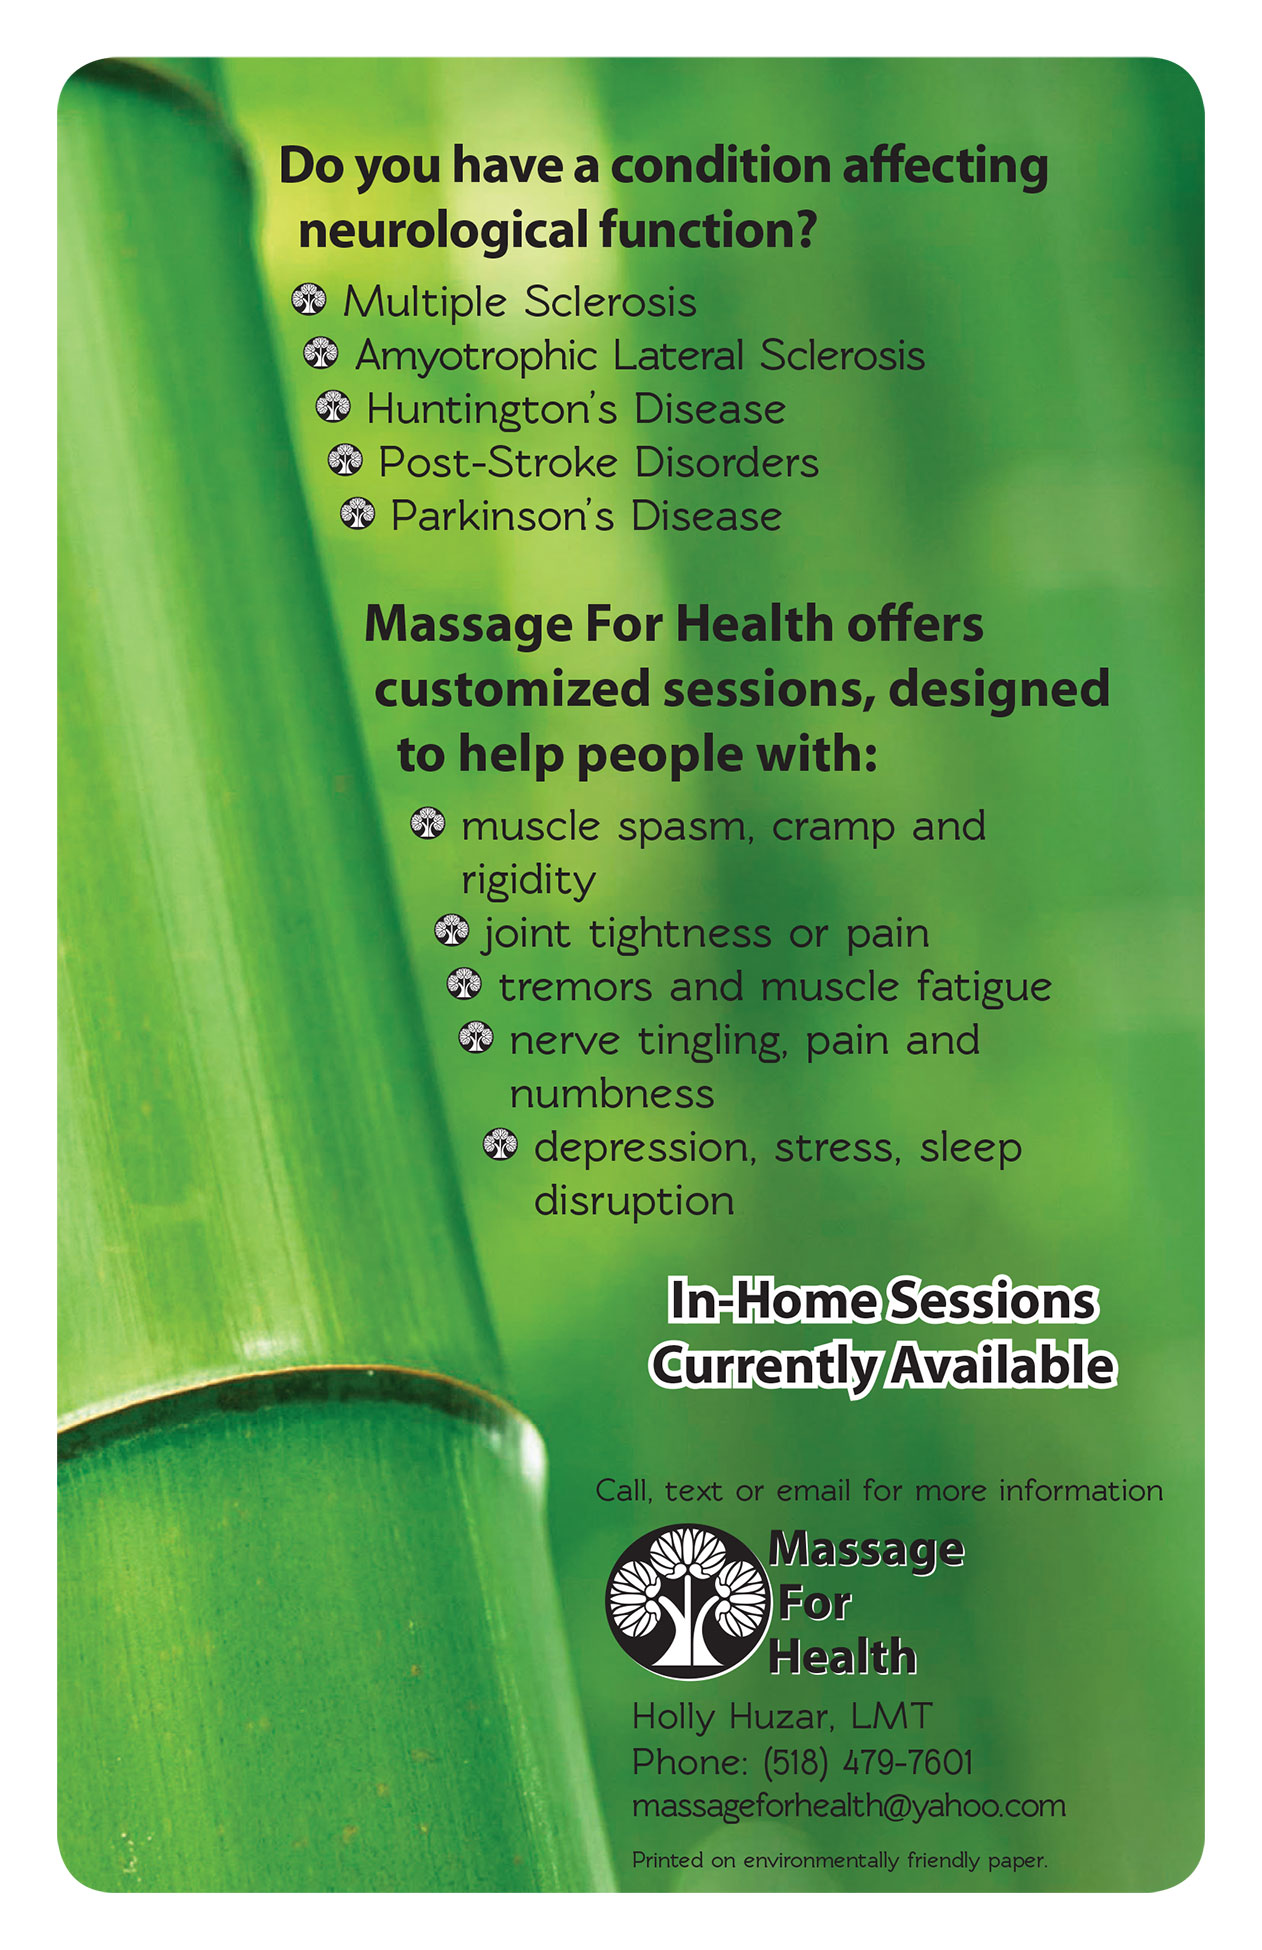 Image of flyer designed and created for Holly Huzar of Massage for Health.